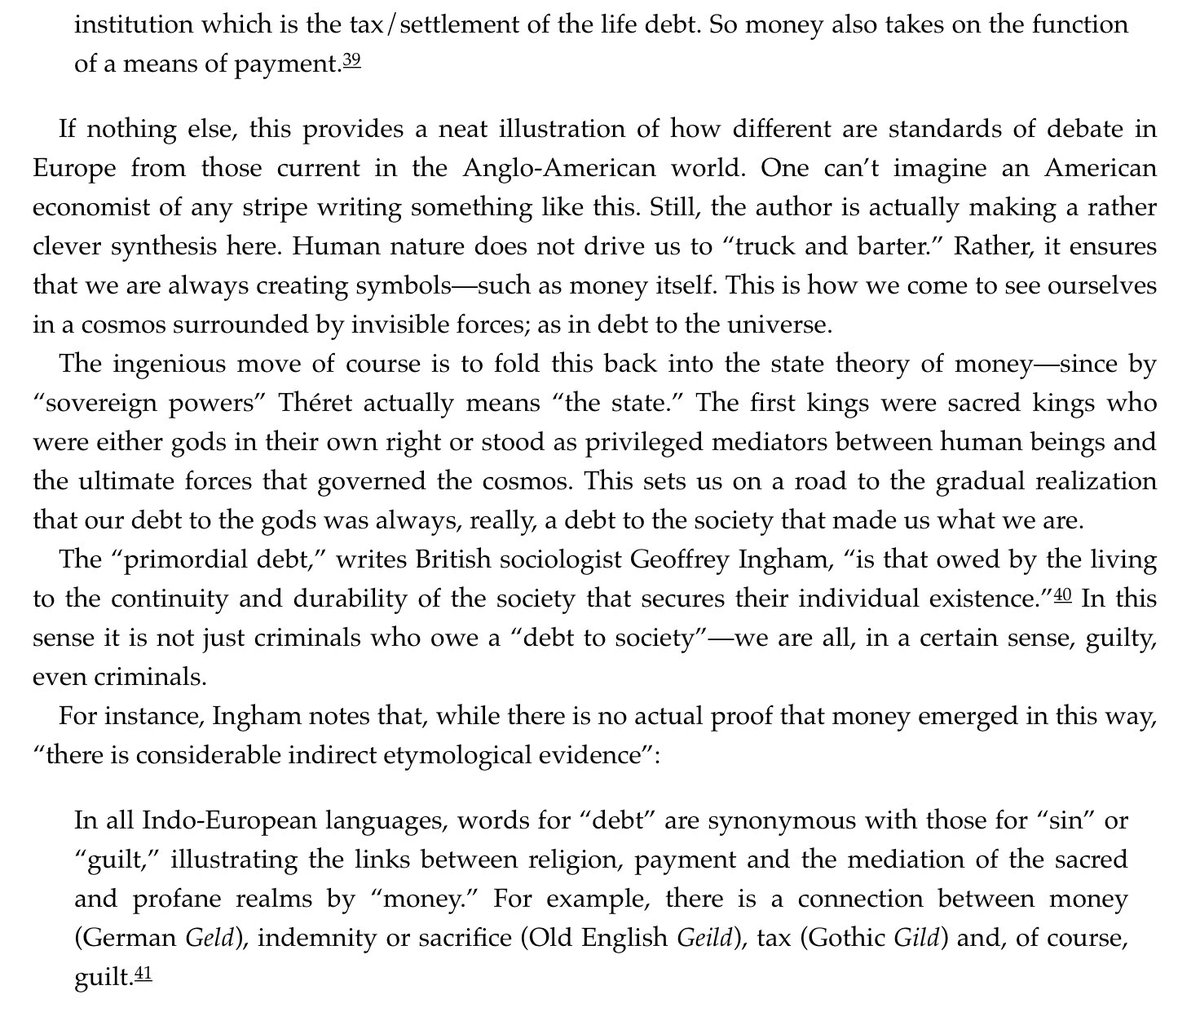 Wow this bit from French economist Bruno Theret is a galaxy-brain level take. There’s a relationship between the debt of human existence itself, to the Gods, and the debt we have to each other...? Wild. I ship it.